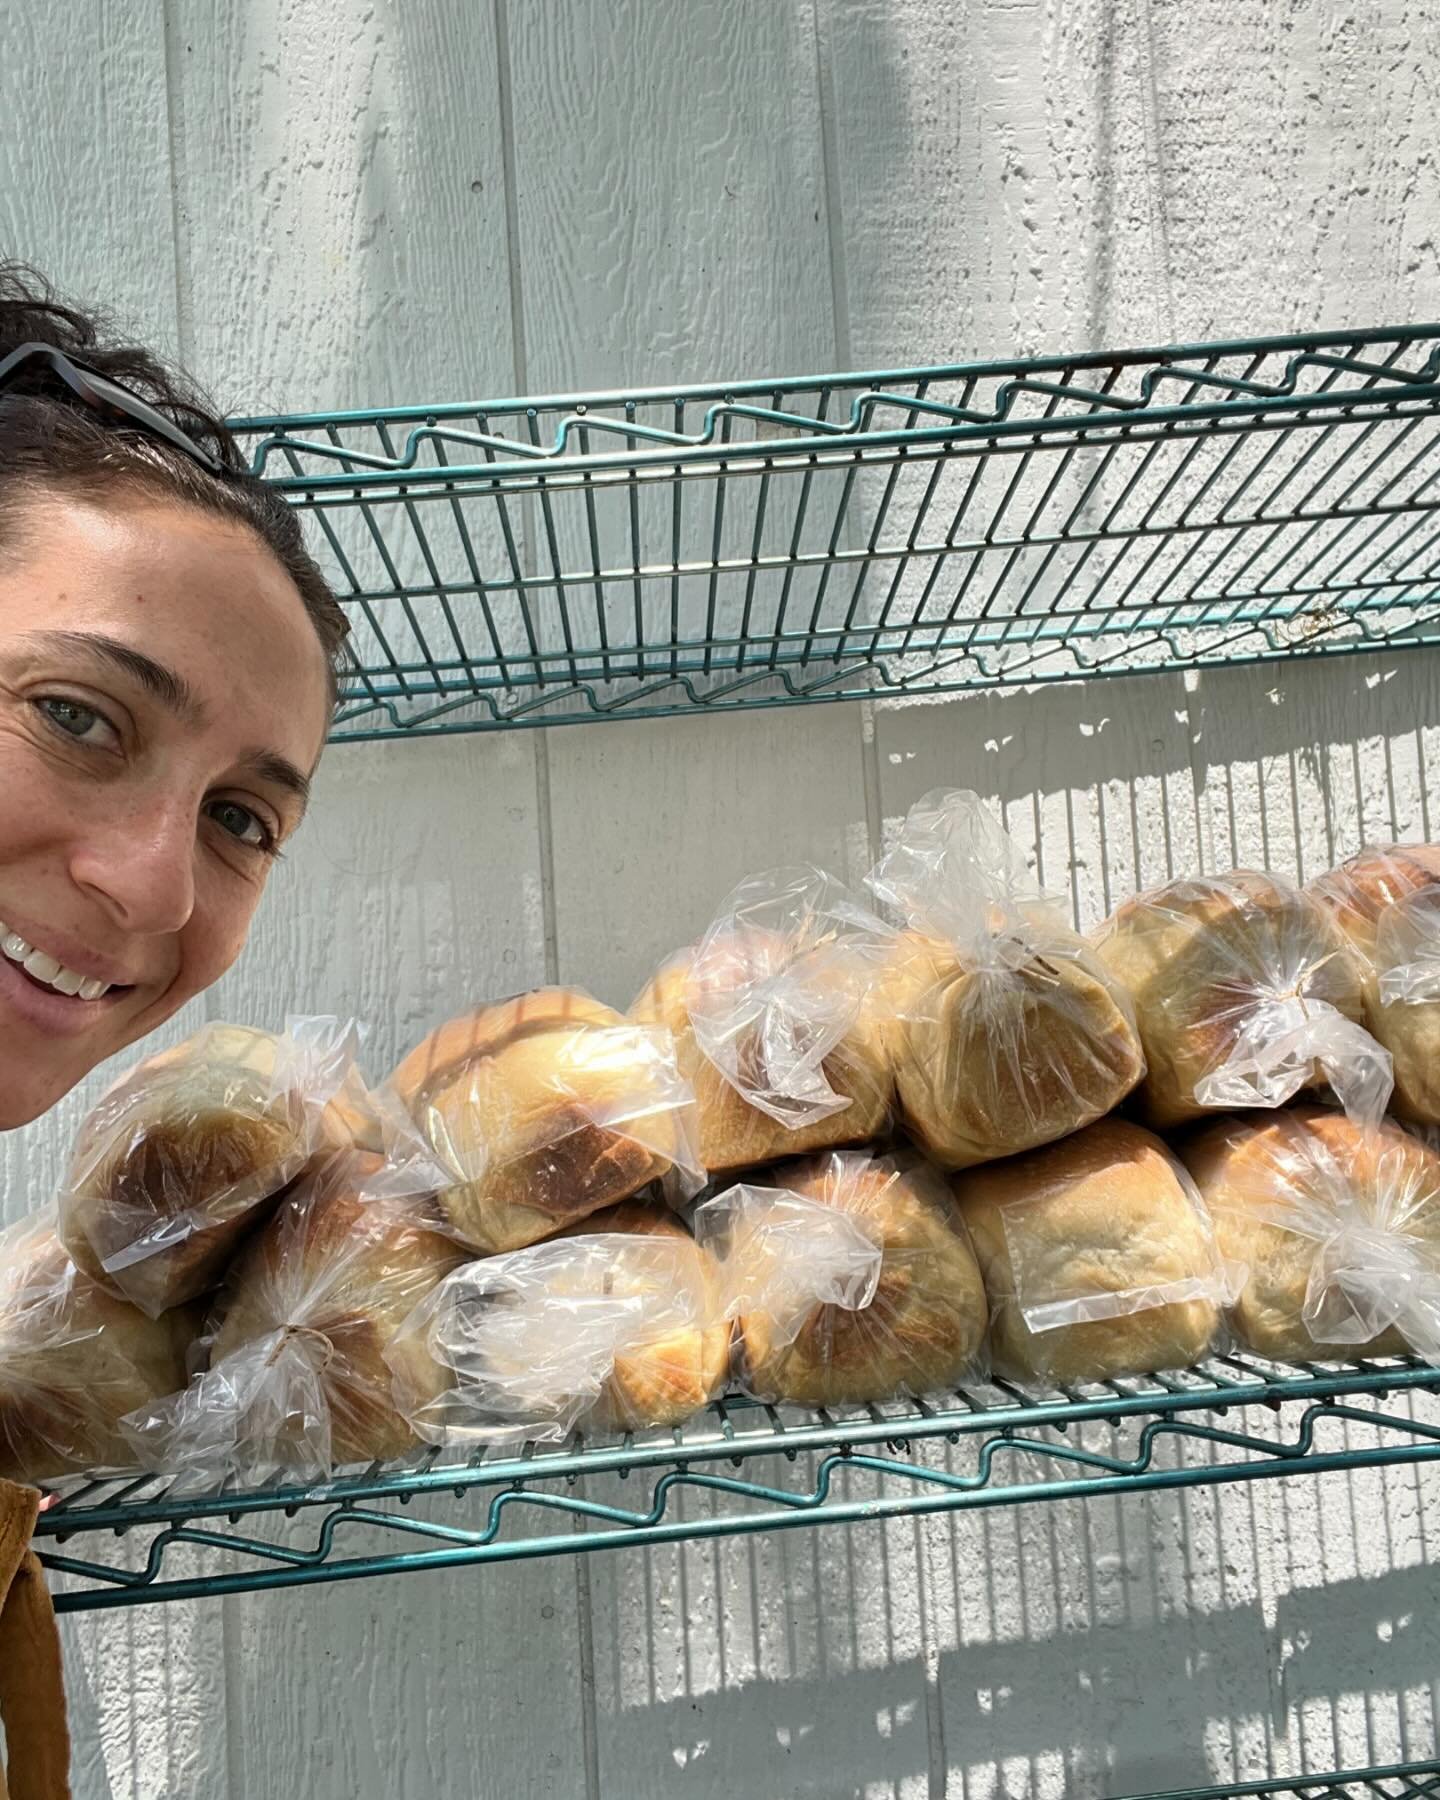 Hi 👋 just peeking in to say Happy Friday from me and some of your bread ☺️🍞
.
.
.
#sourdoughbread #sourdough #asimplerplace #greengrocer #onlinefarmersmarket